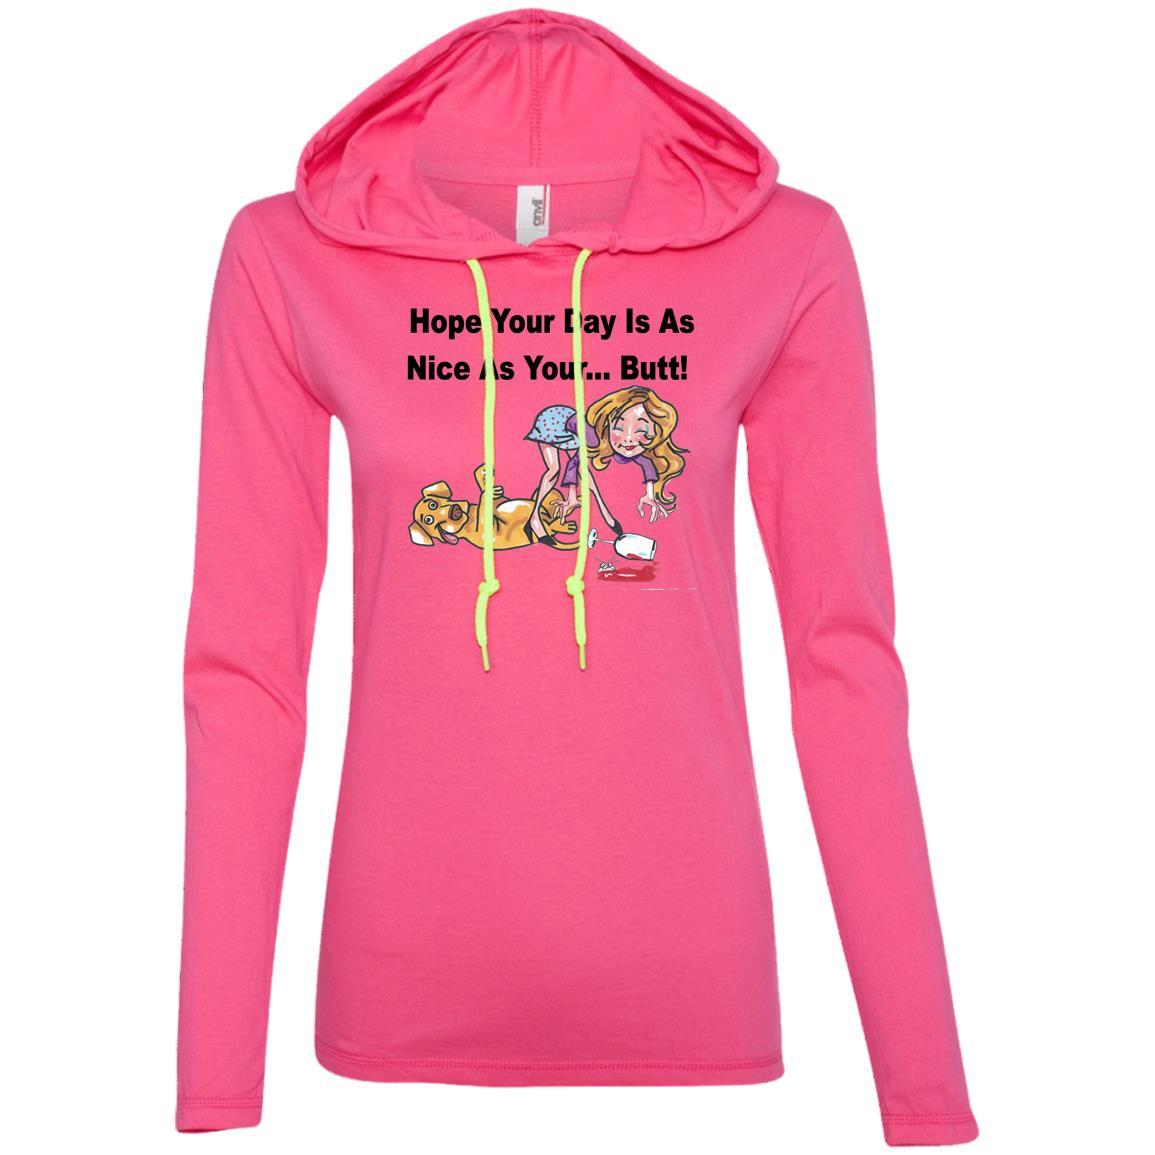 T-Shirts Hot Pink/Neon Yellow / S WineyBitches.co "Hope Your Day Is As Nice As Your...Butt" Blk Lettering Ladies' LS T-Shirt Hoodie WineyBitchesCo